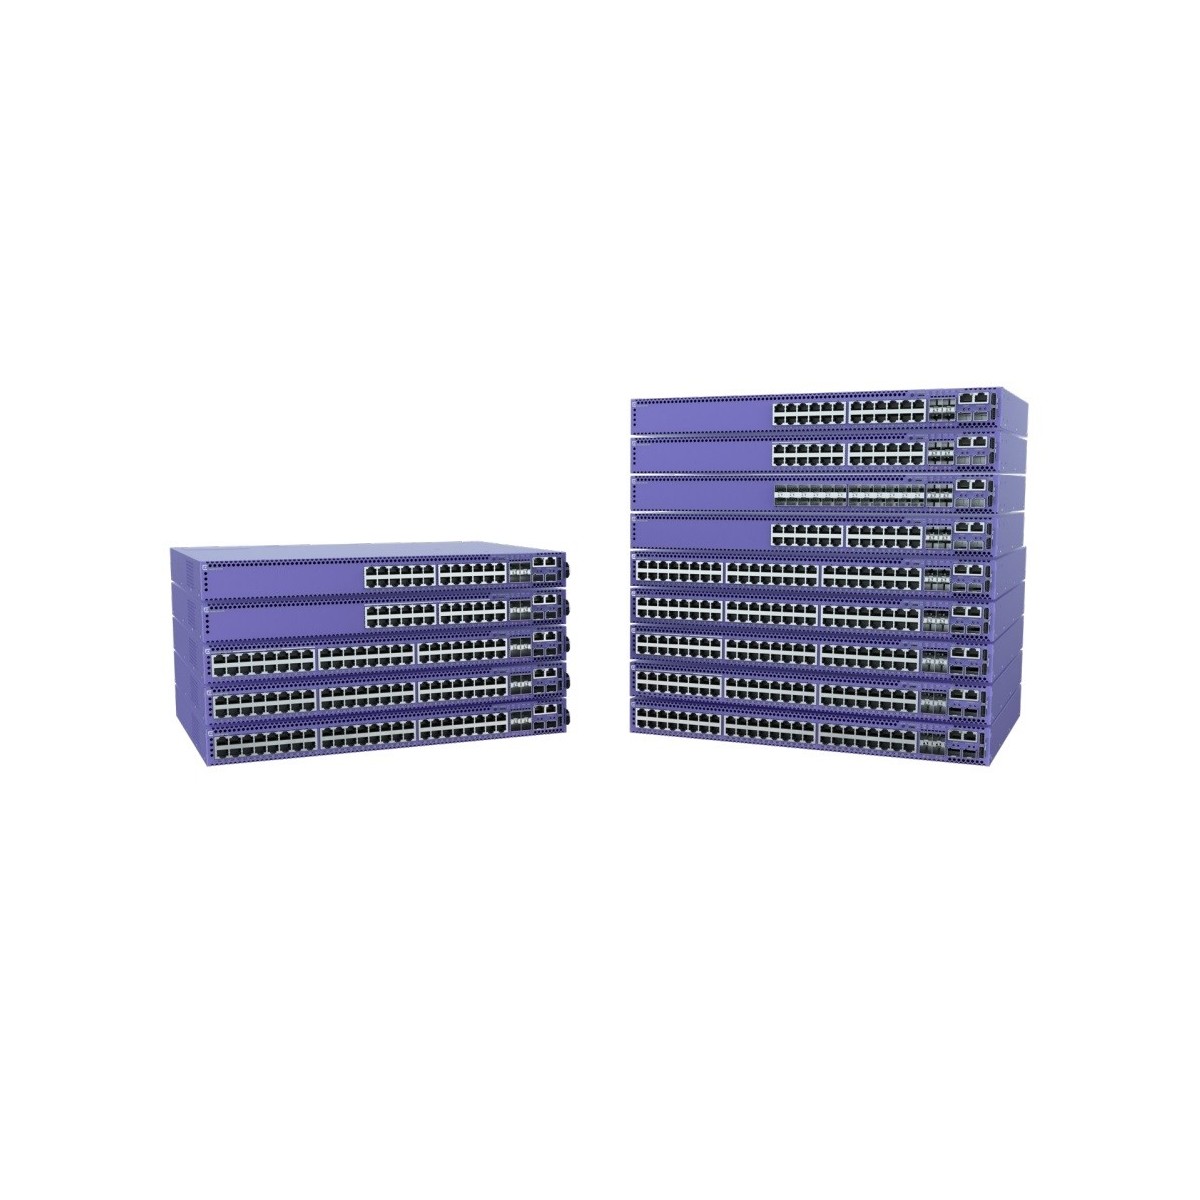 Extreme Networks ExtremeSwitching 5420F 16 - Switch - 1 Gbps